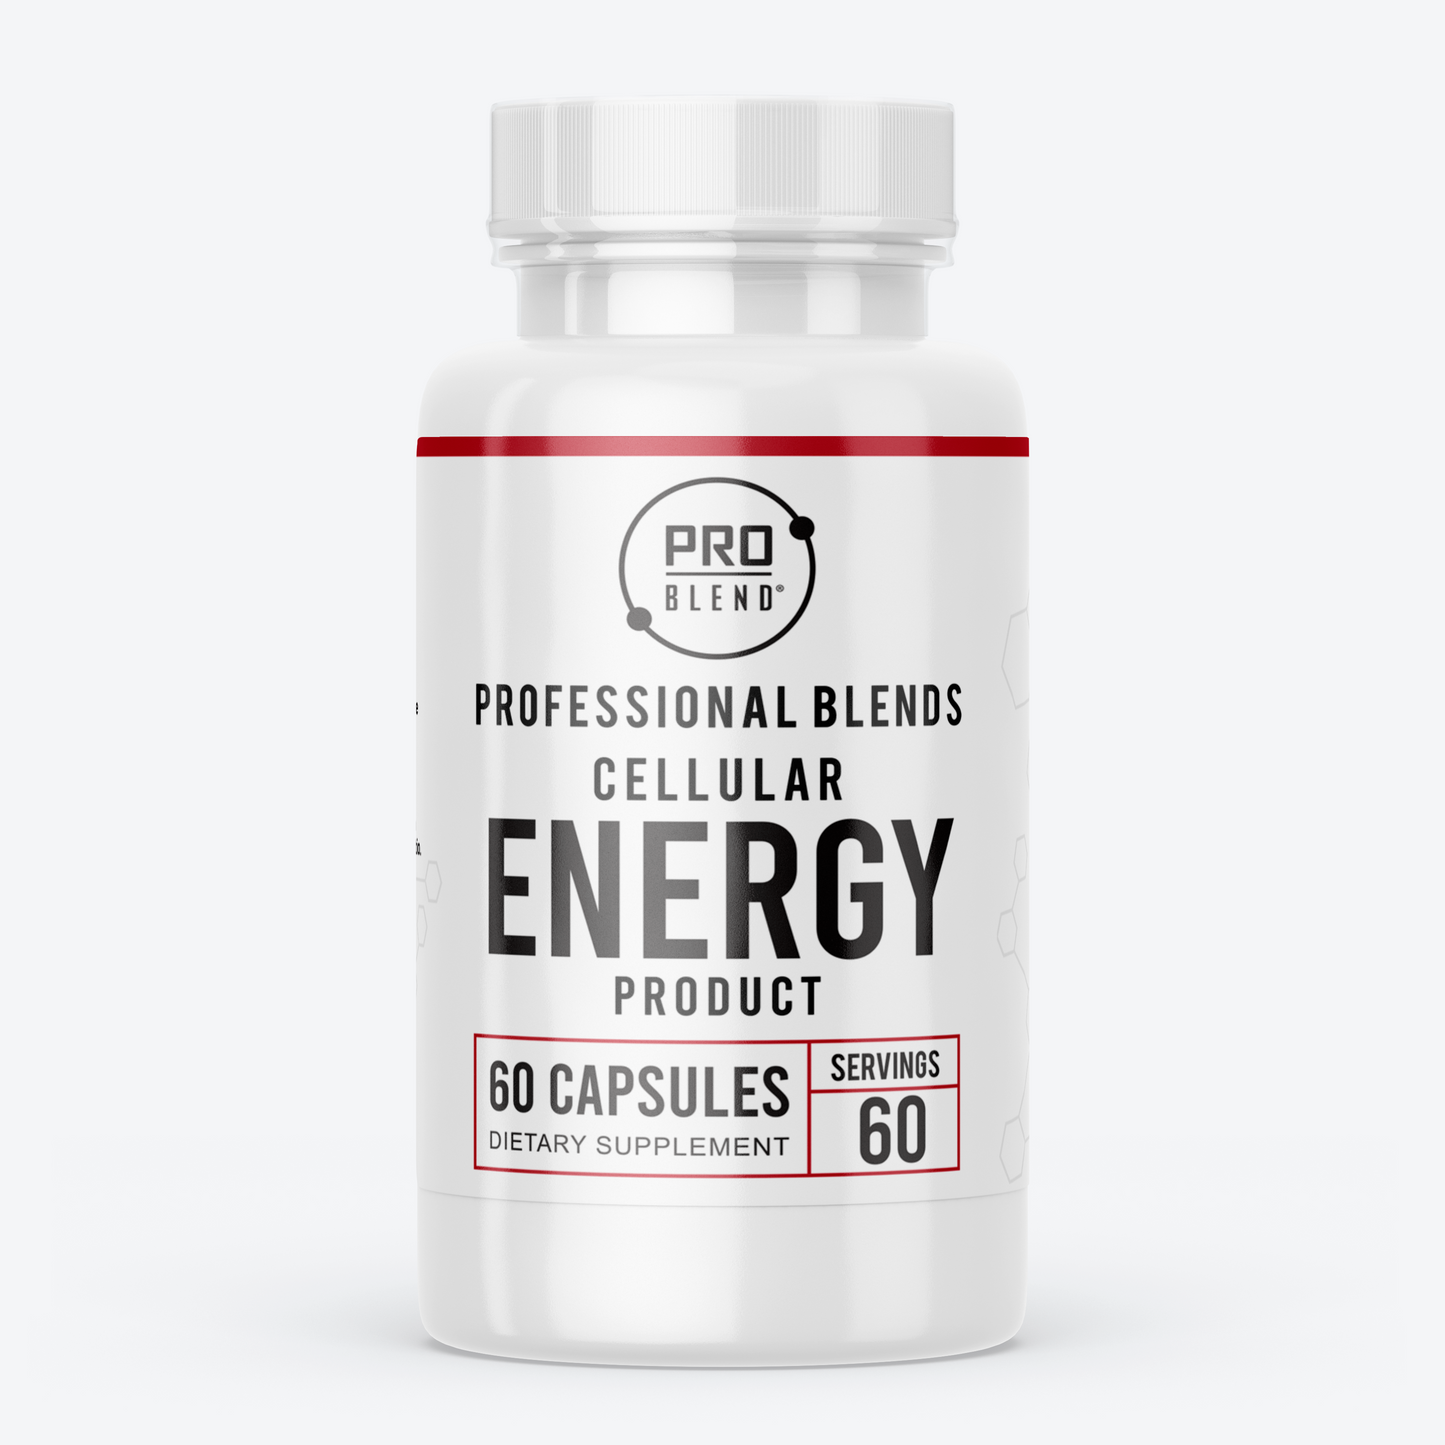 EnerGize: Cellular Energy & Recovery Adaptogenic Complex - 60 Capsules